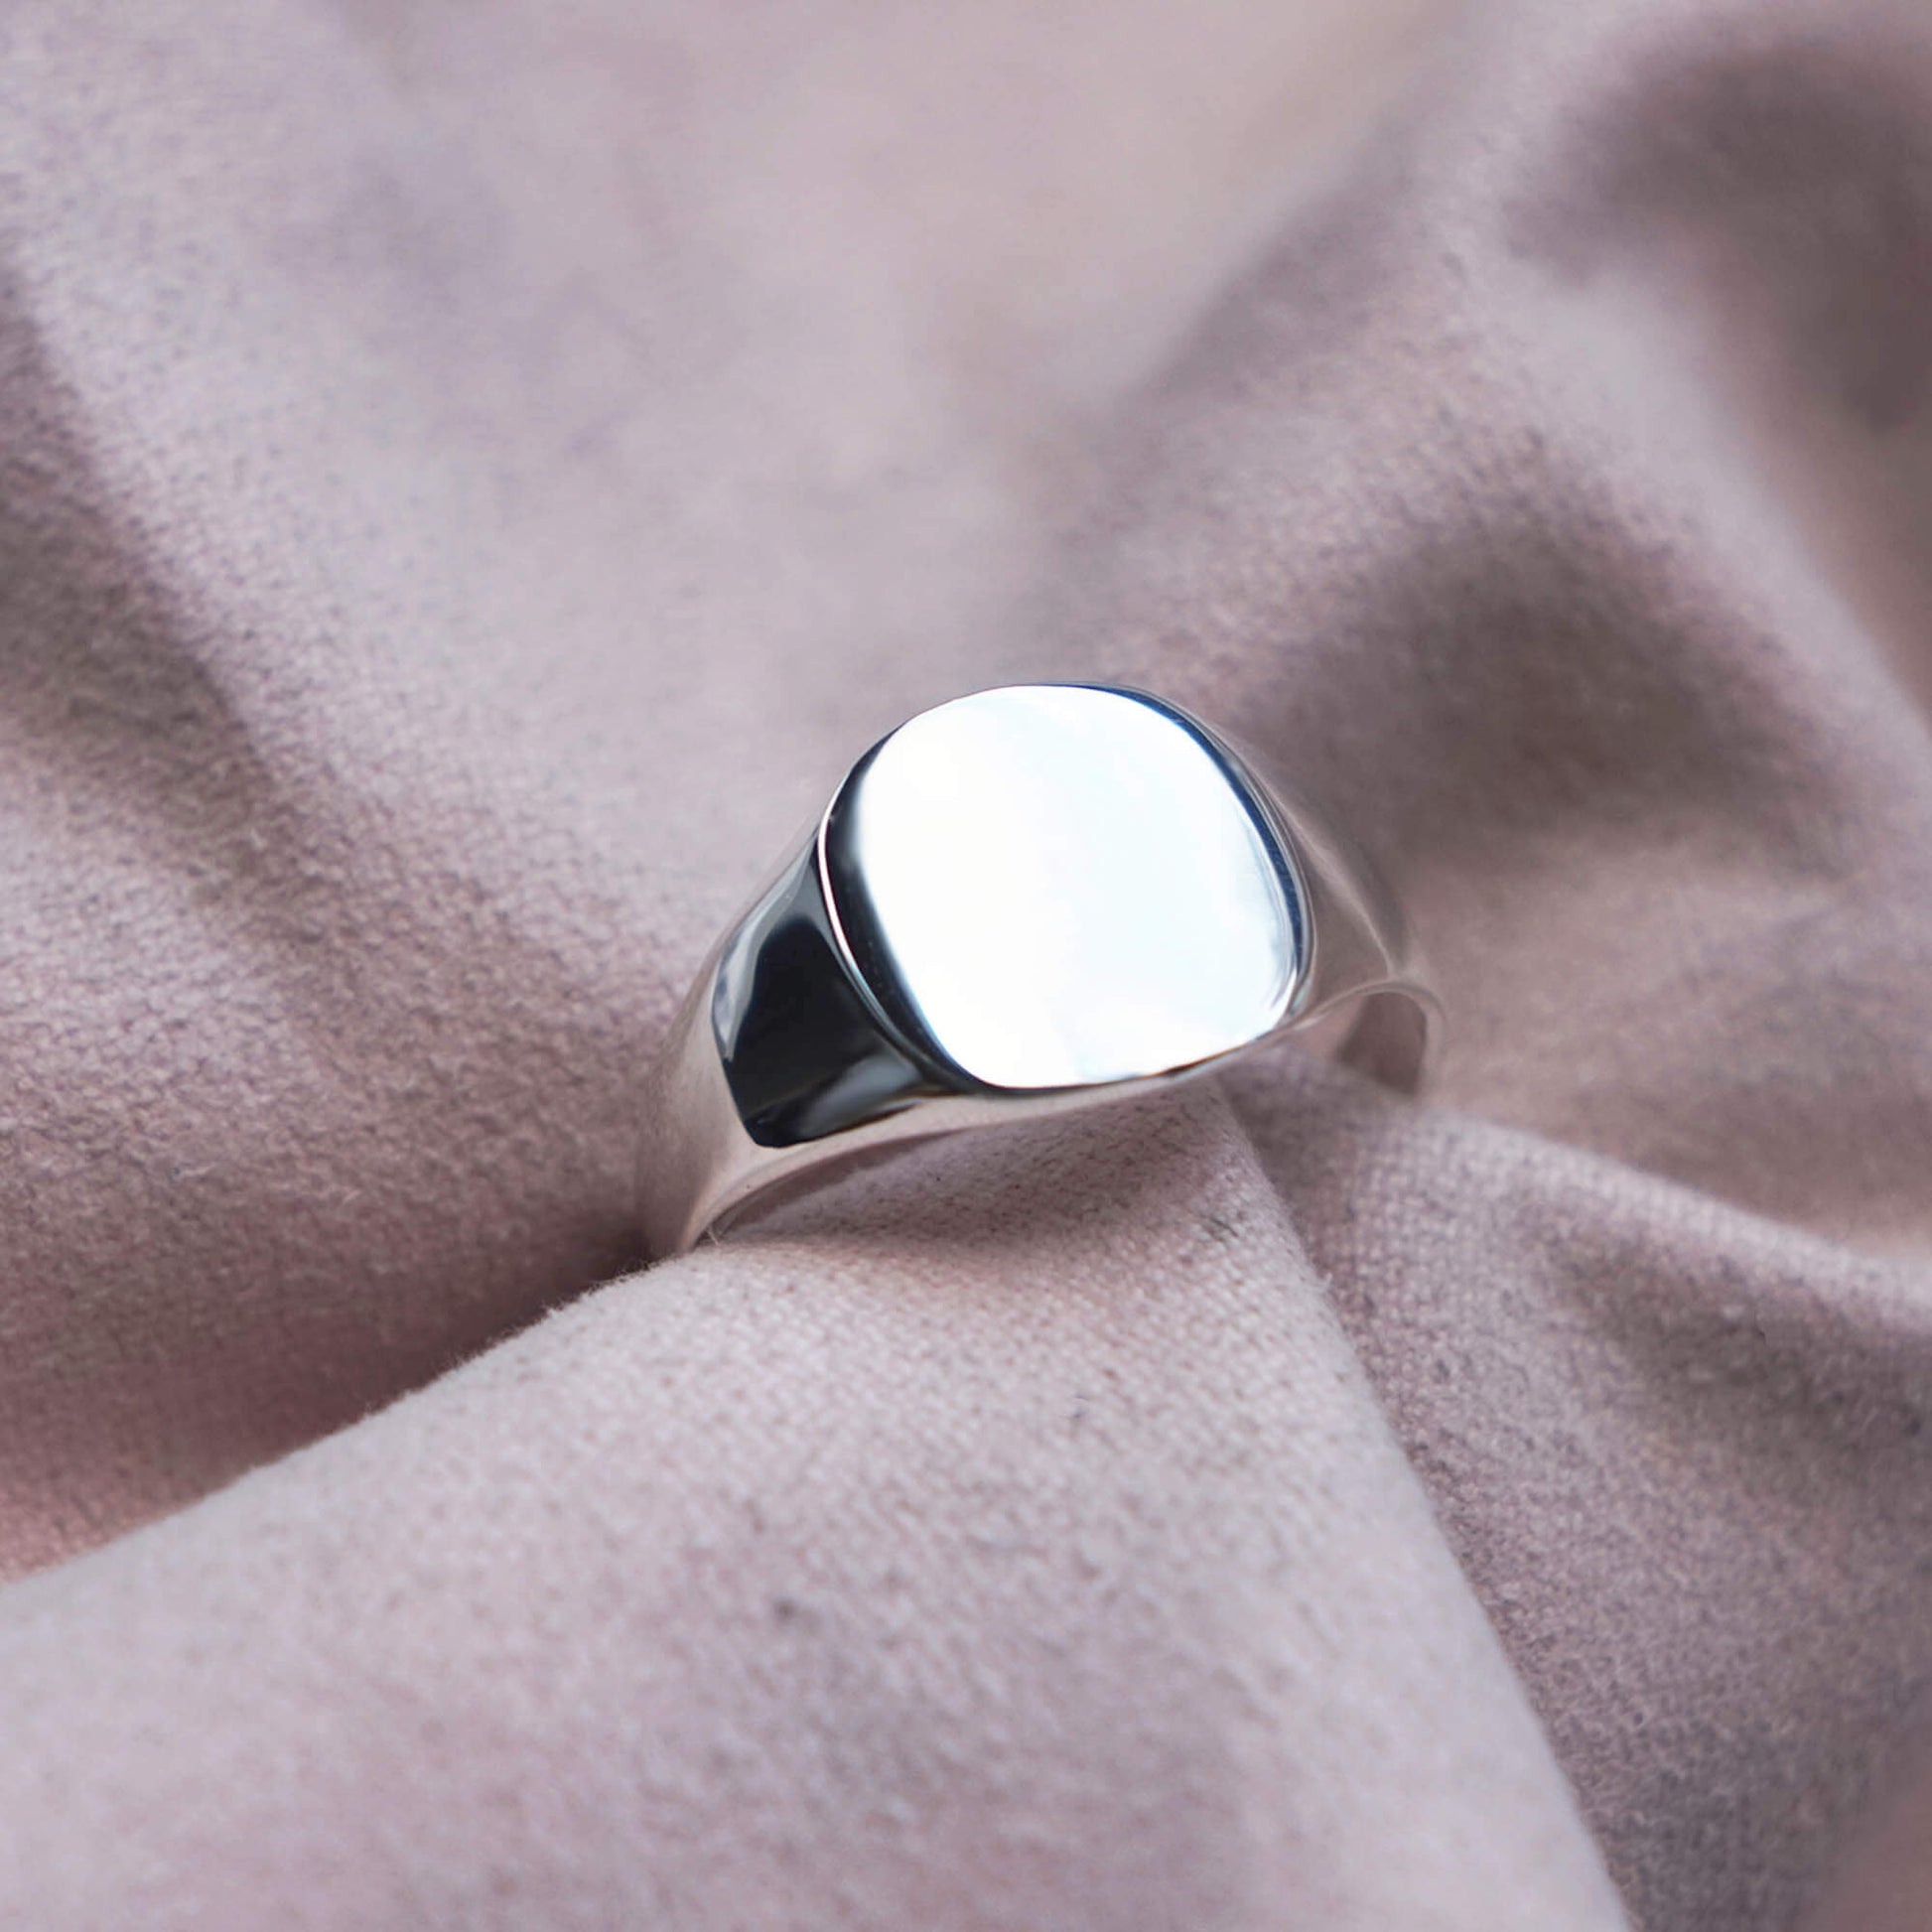 STERLING SILVER CUSHION SMOOTH SIGNET RING IN A PINK JEWELLERY CLOTH.